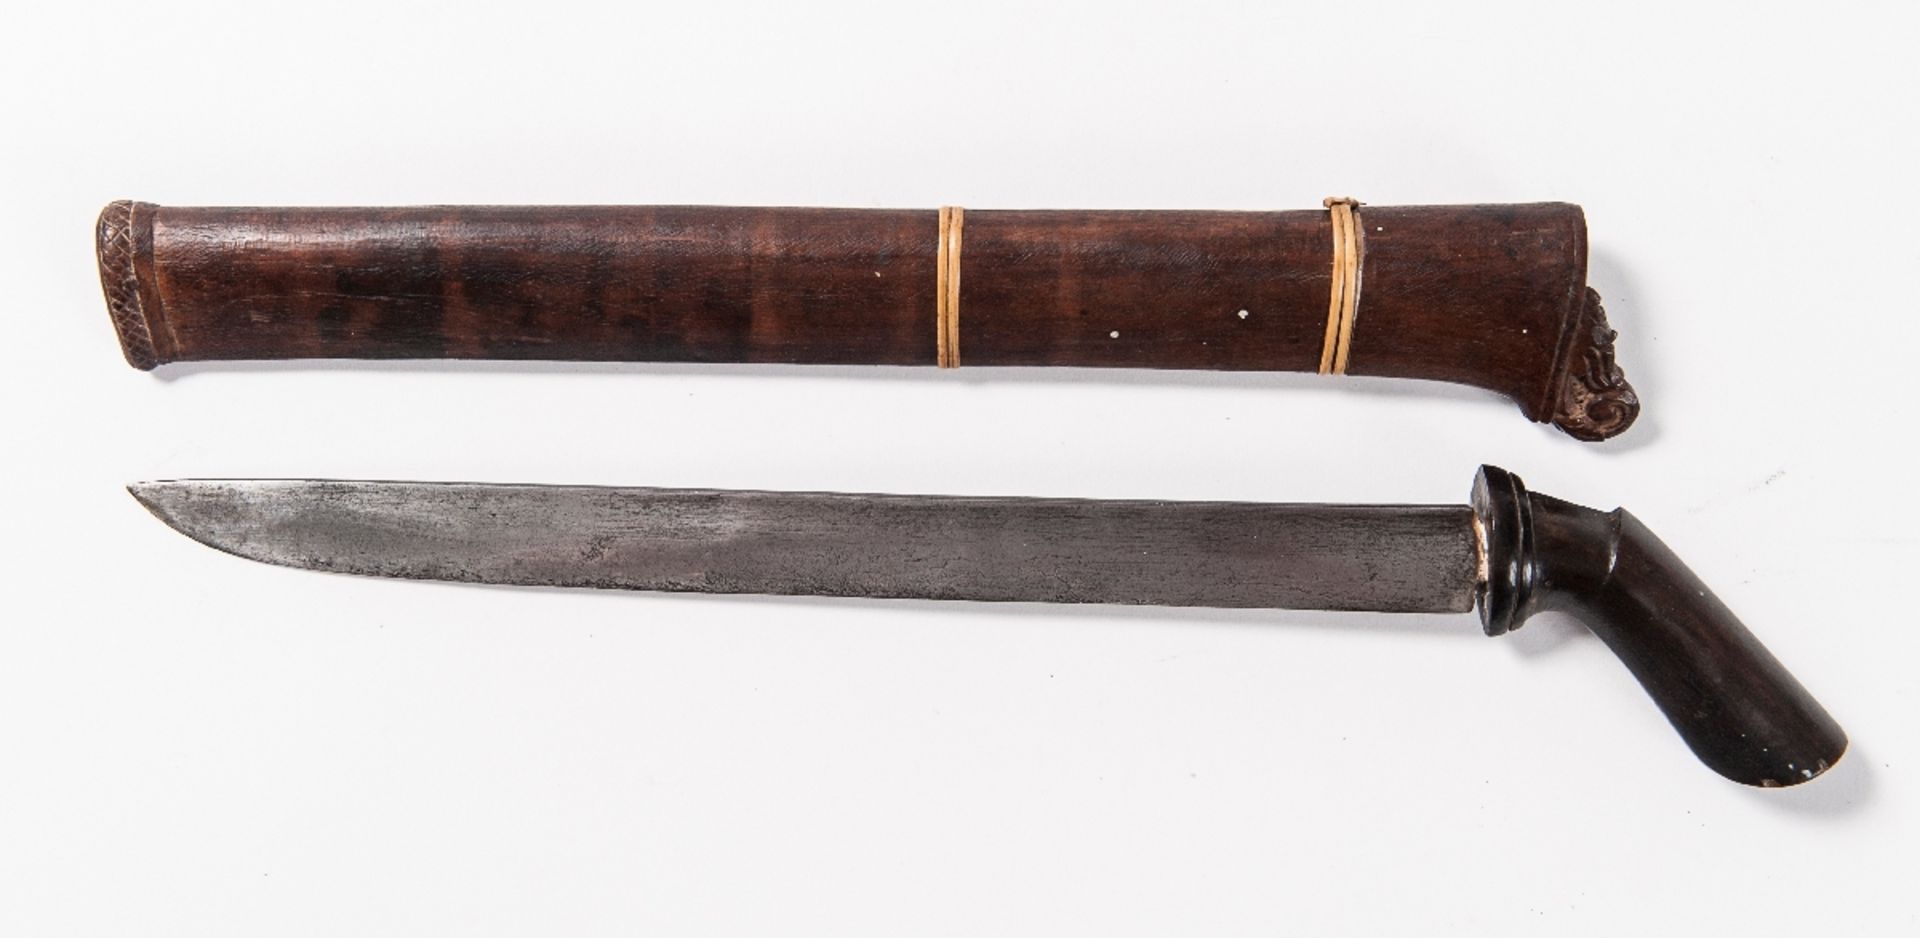 AN OLD JAVA SWORD PENDAG  Iron and wood. Java, 19th / early 20th cent.  Good condition.  LENGTH 42